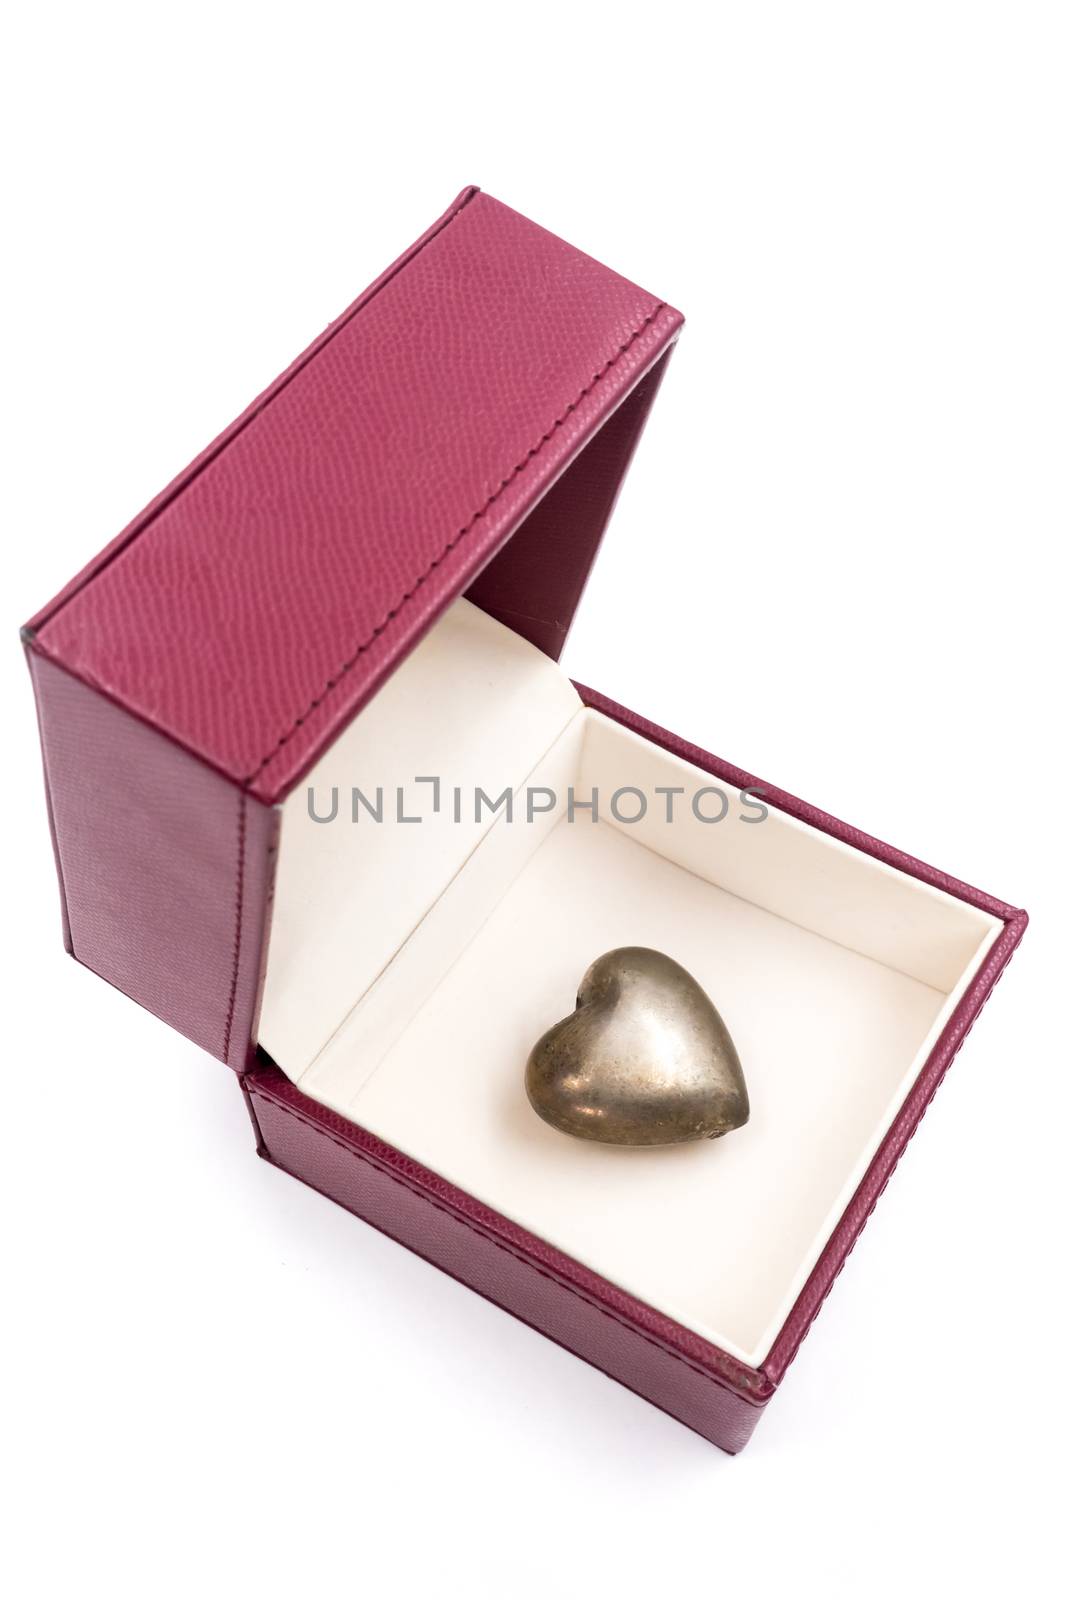 Golden heart in red gift box on white background. by ronnarong